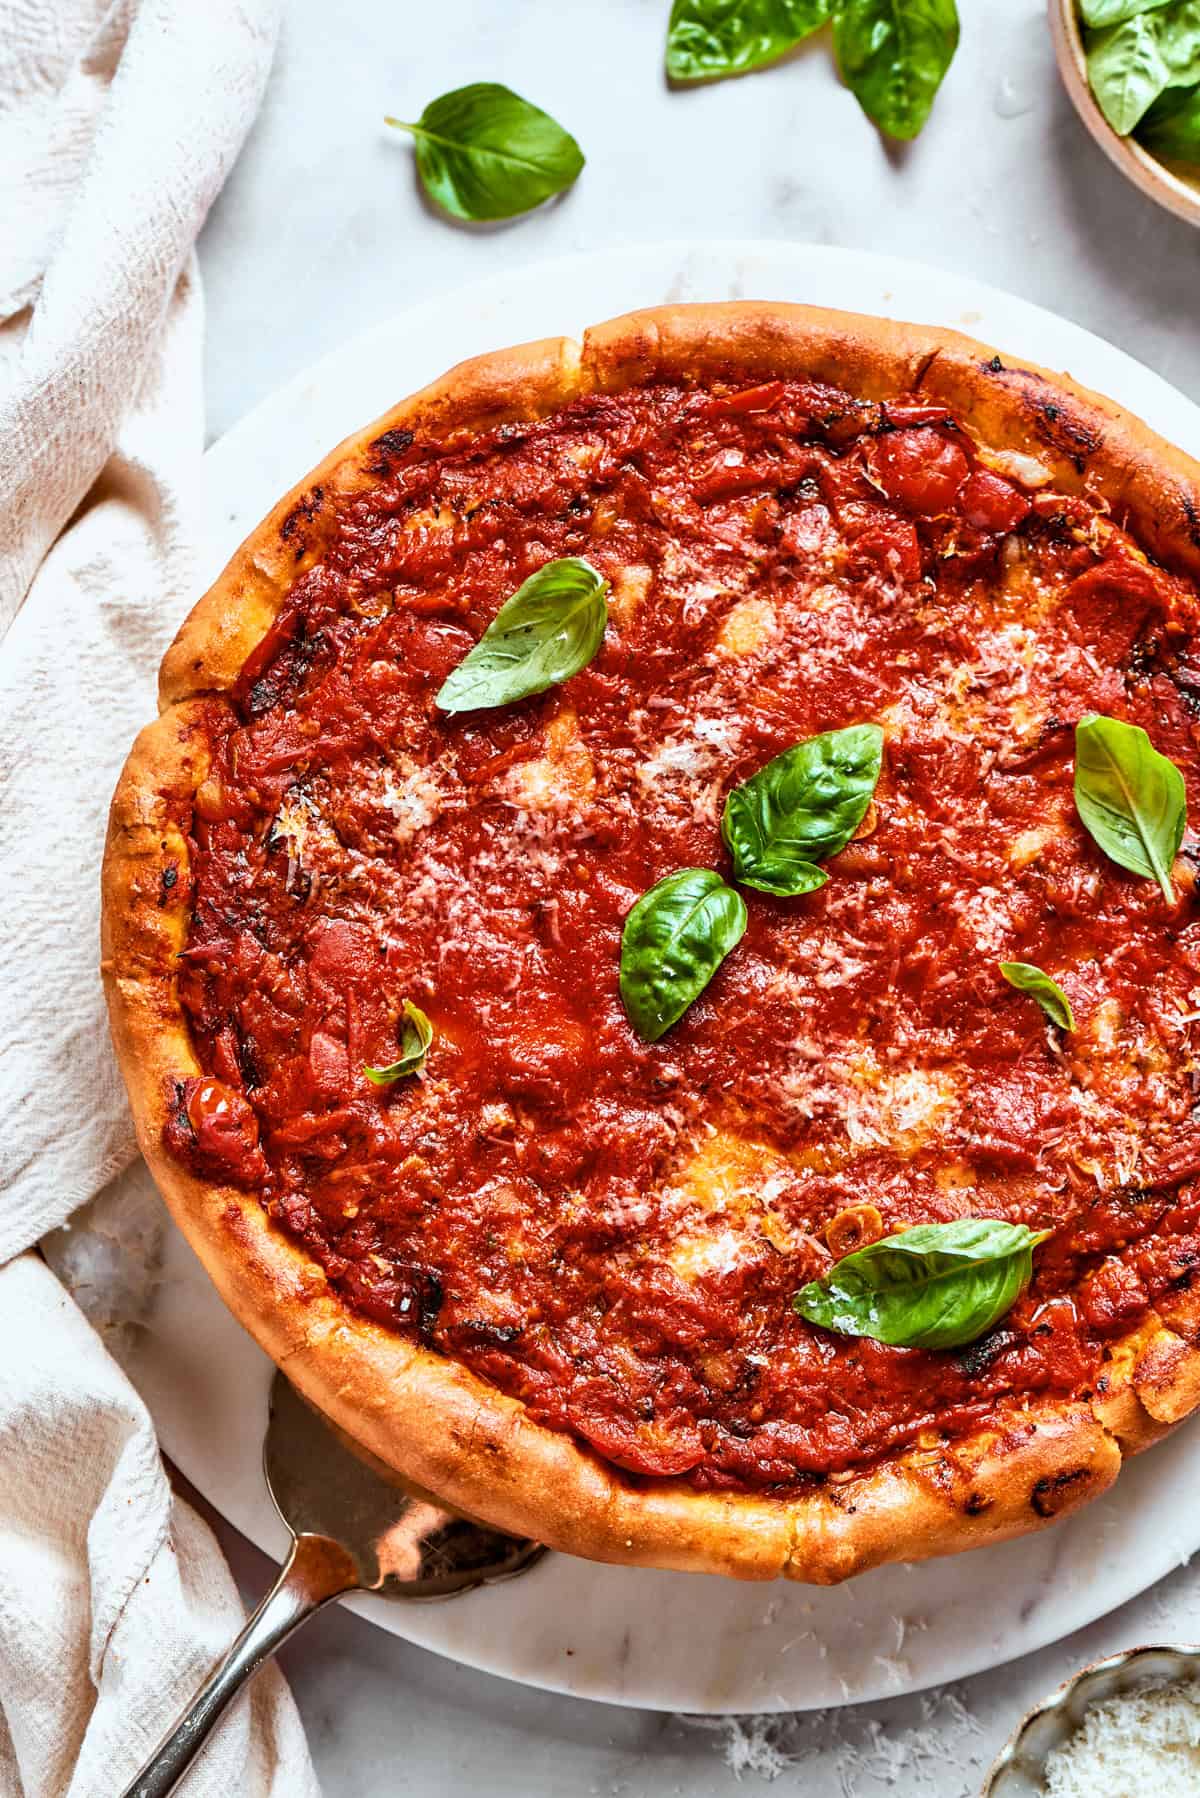 Overhead image of pizza topped with tomato sauce and garnished with fresh basil leaves.